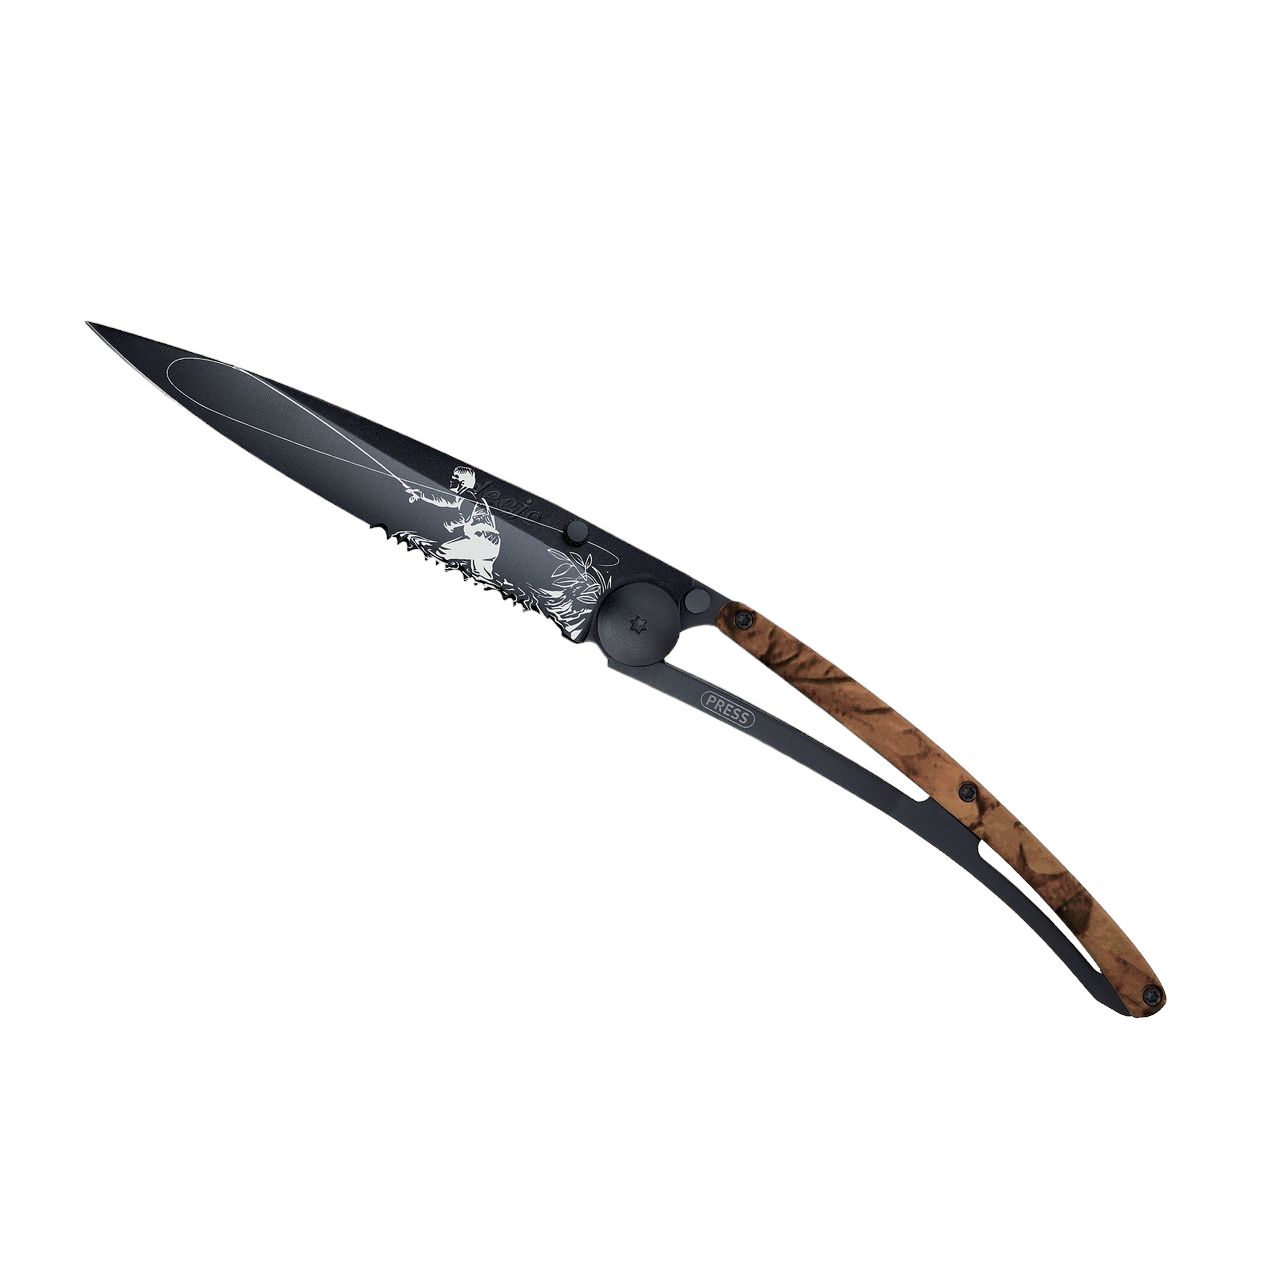 Serrated 37g Brown Camo, Tattoo "Fly Fishing", Pocket Knife